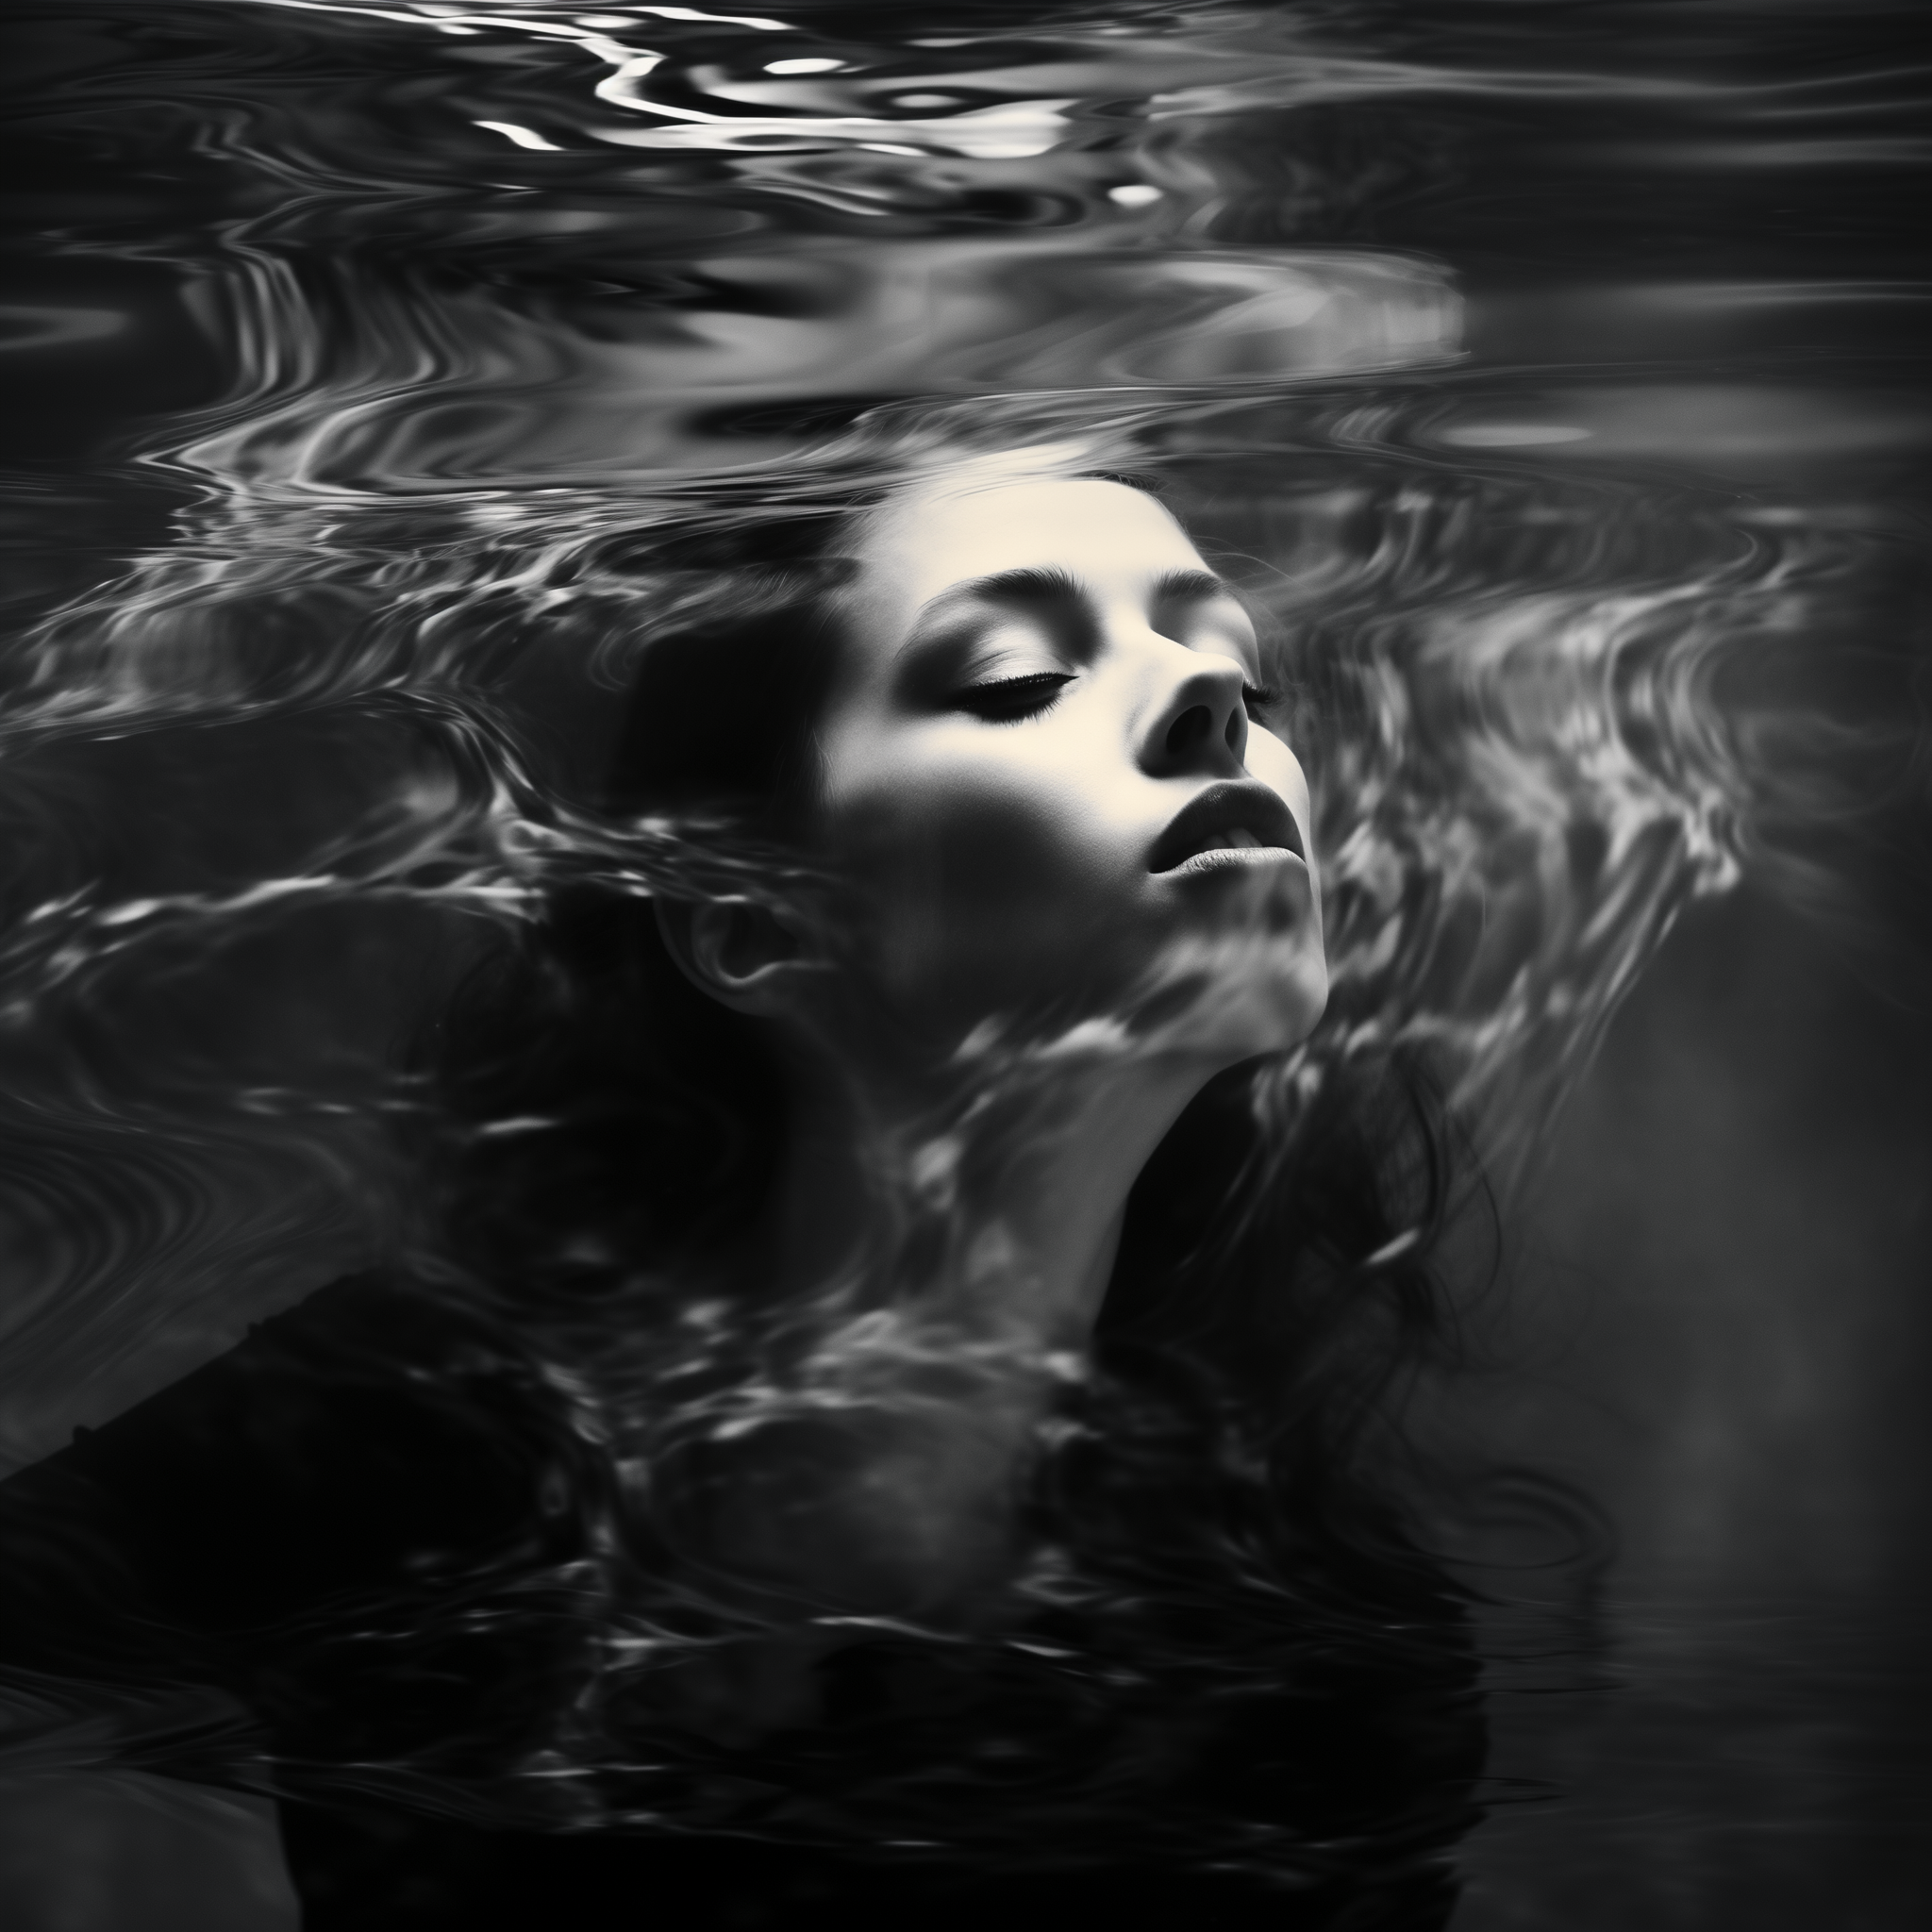 fotofinis_black_and_white_photograph_of_a_woman_underwater_in_t_98e281fa-c58c-445d-ae8d-0fa89caff497